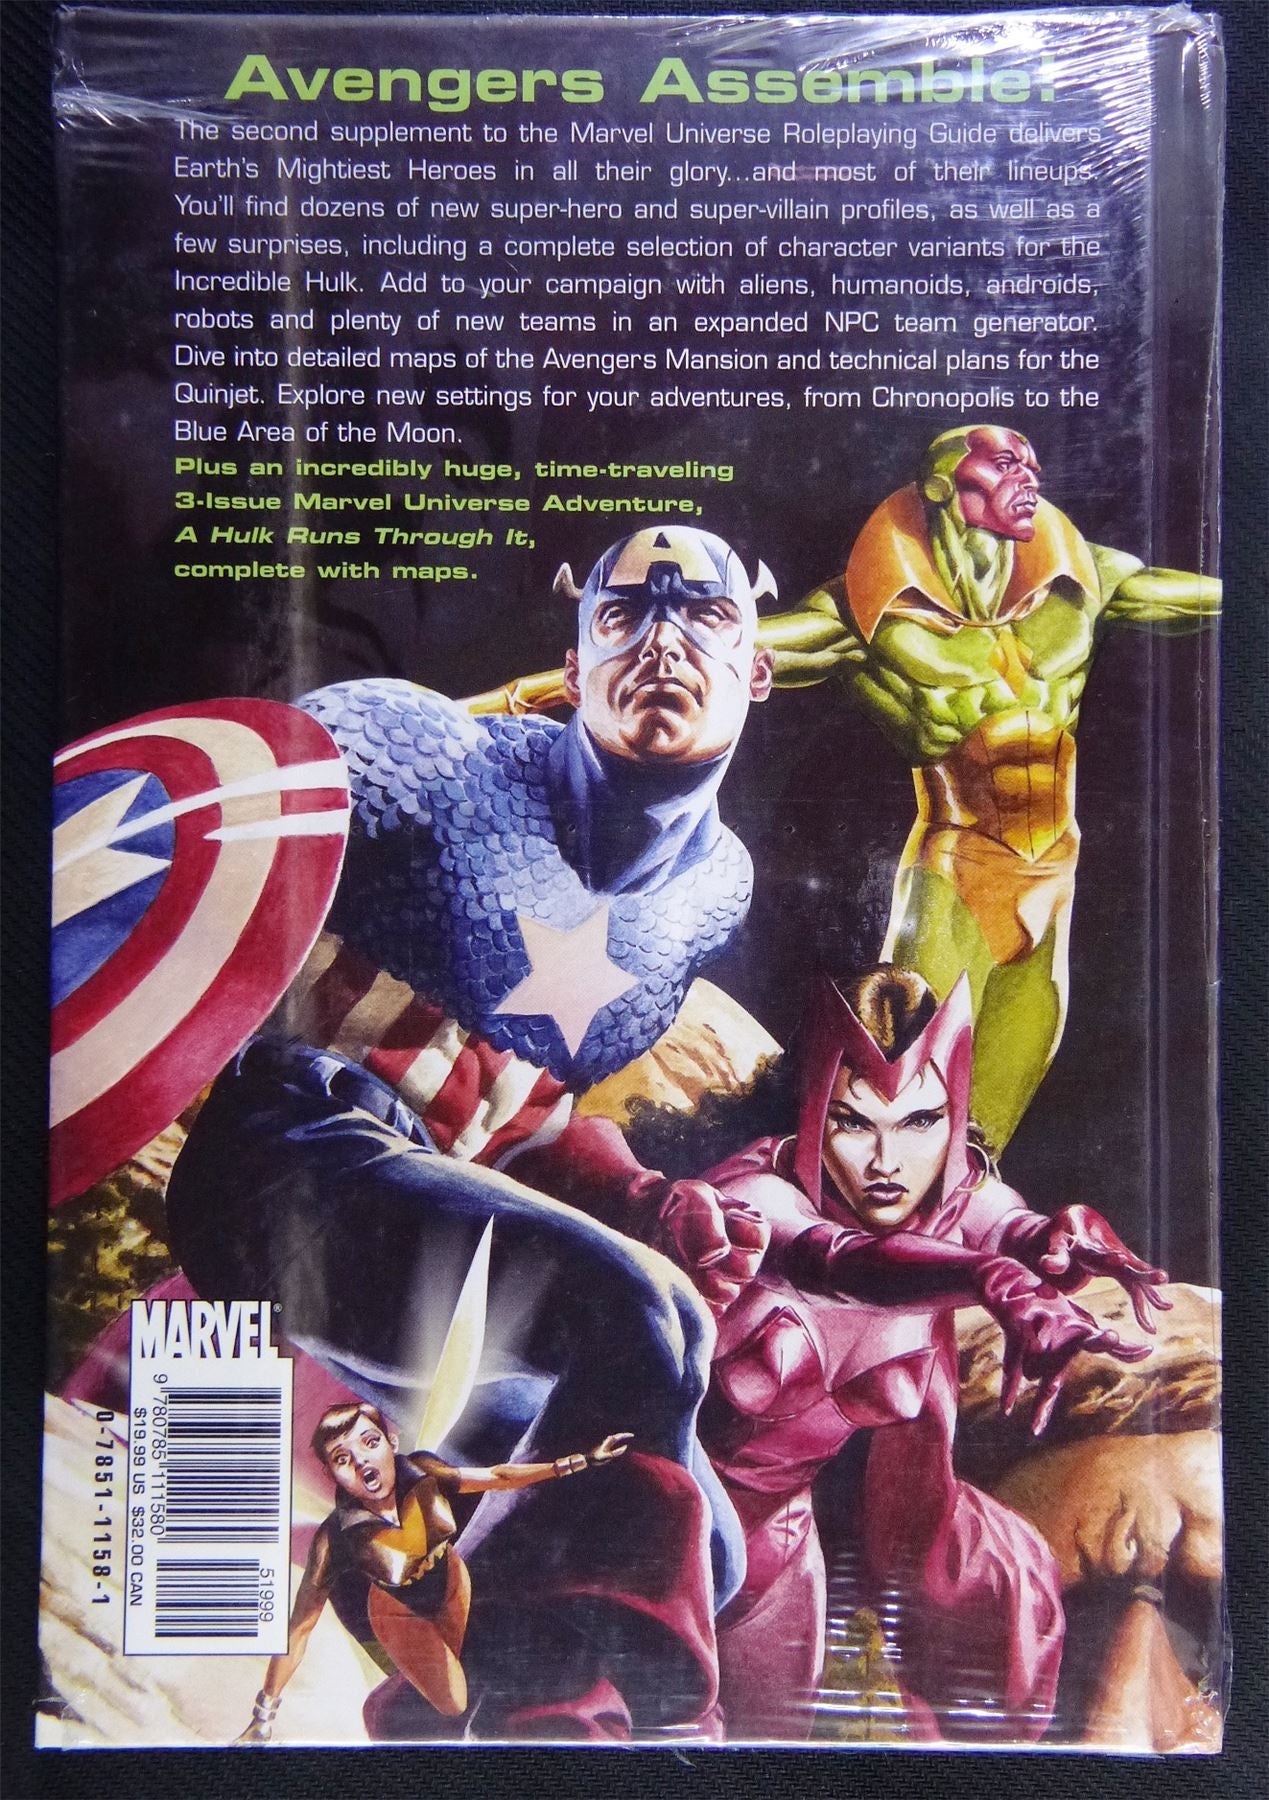 Guide To The Hulk And Avengers - The Marvel Universe - Roleplay - RPG #14M